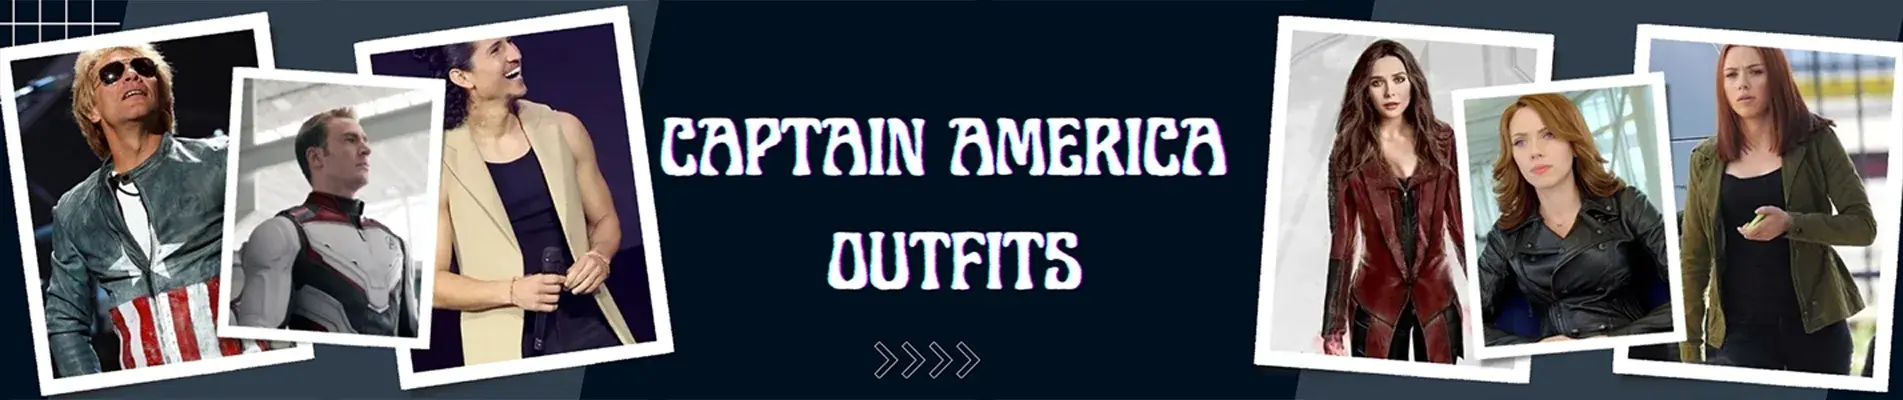 Captain America Outfits